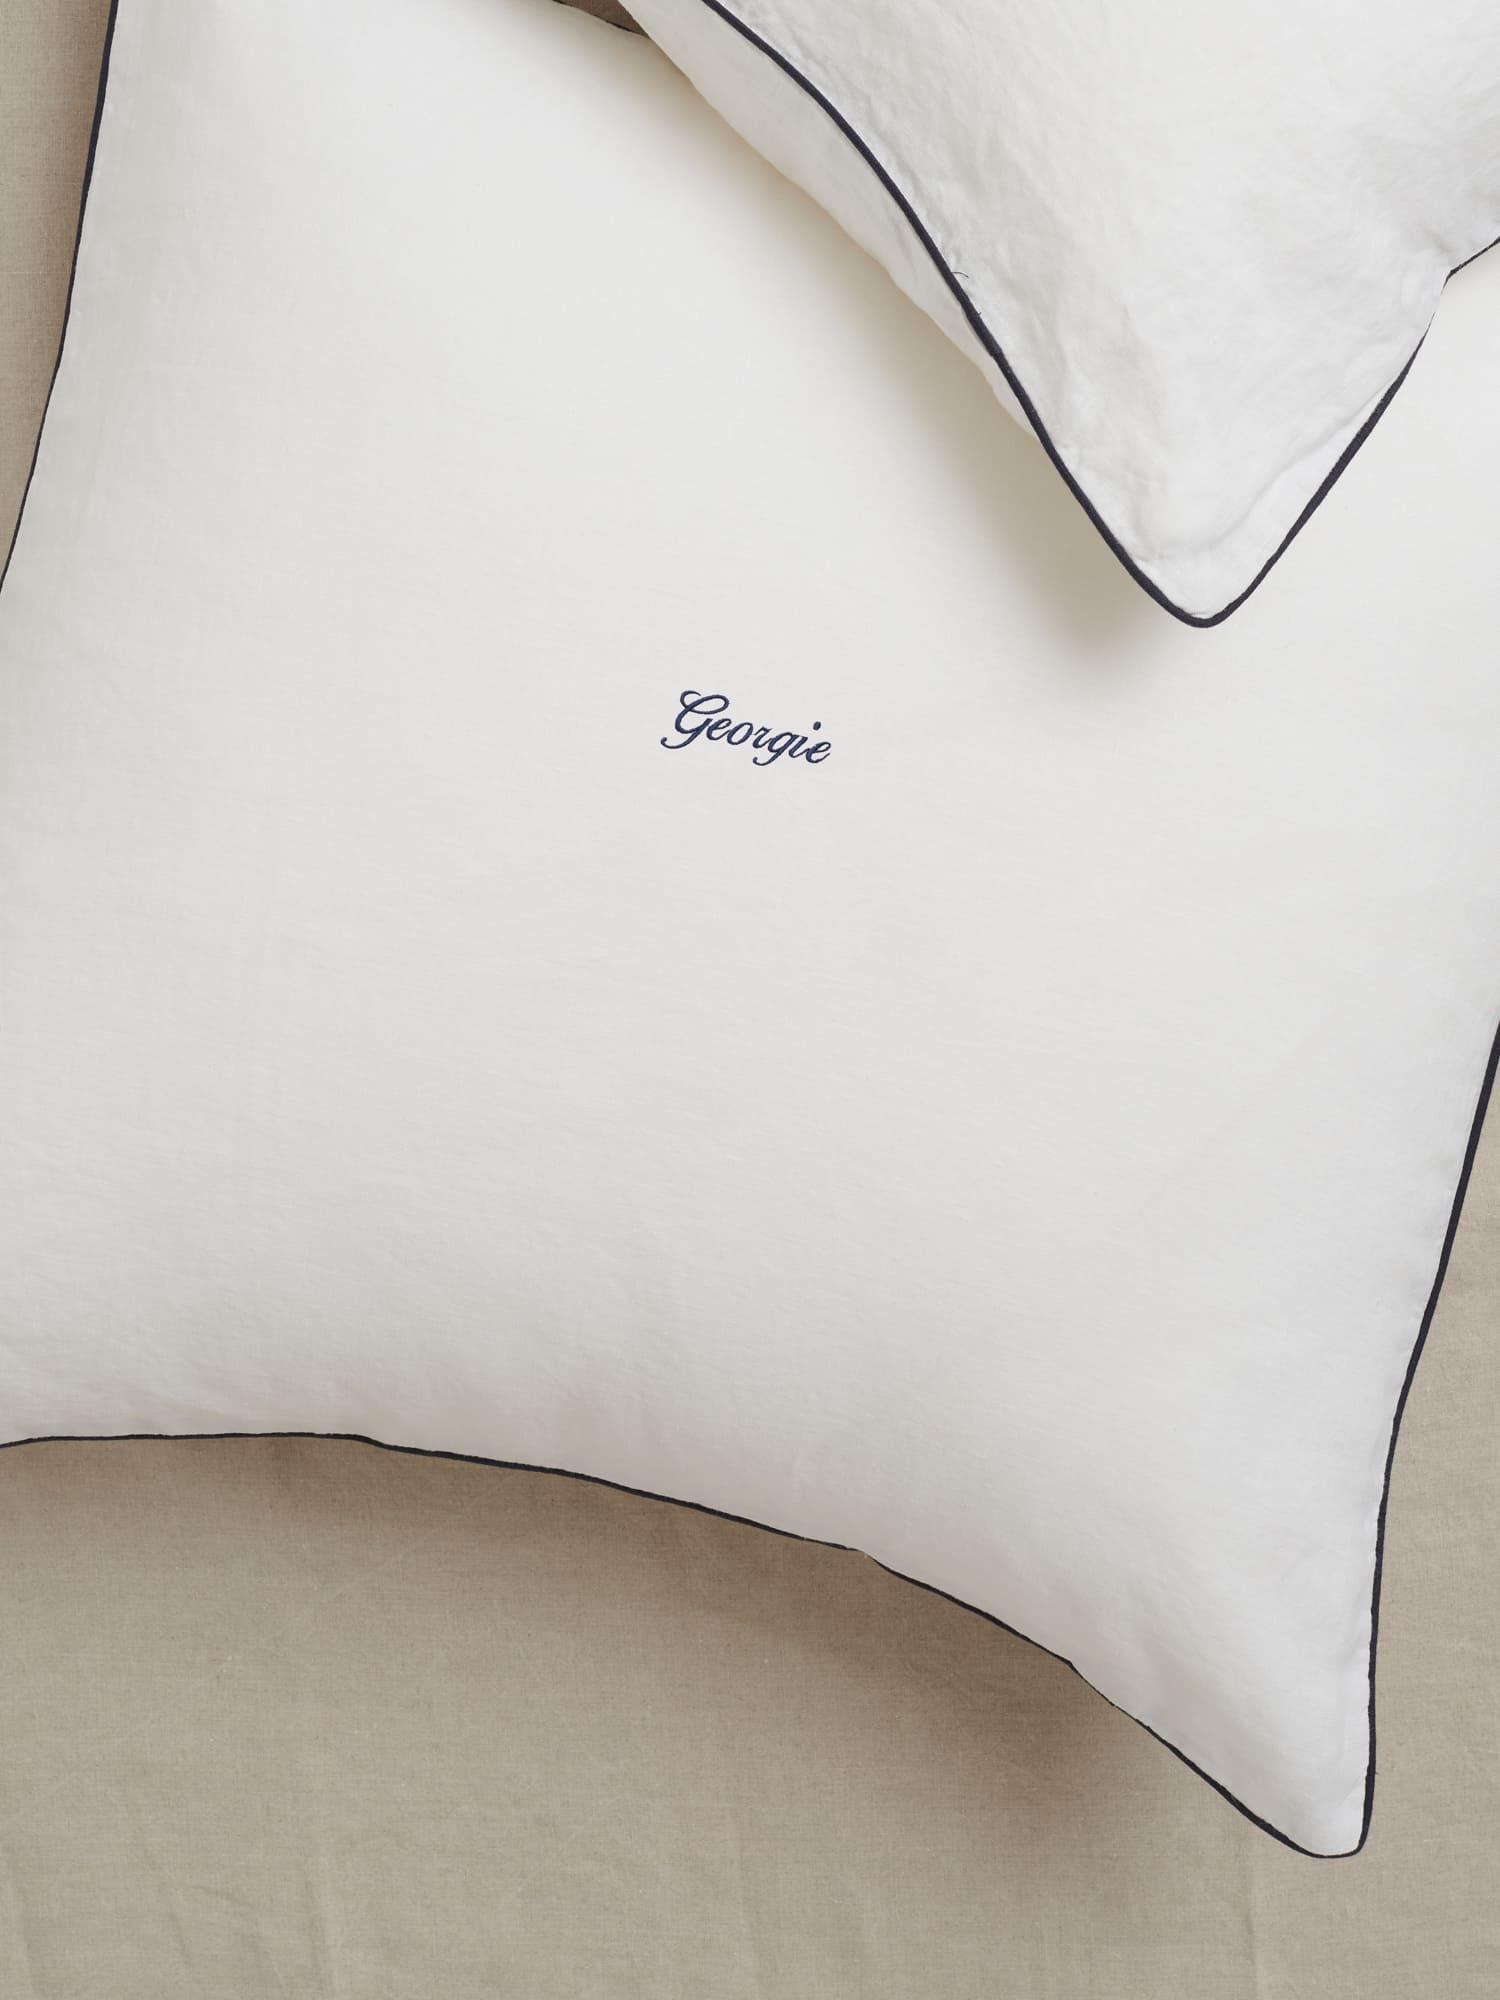 Embroidered Linen Pillowslip Navy Piping